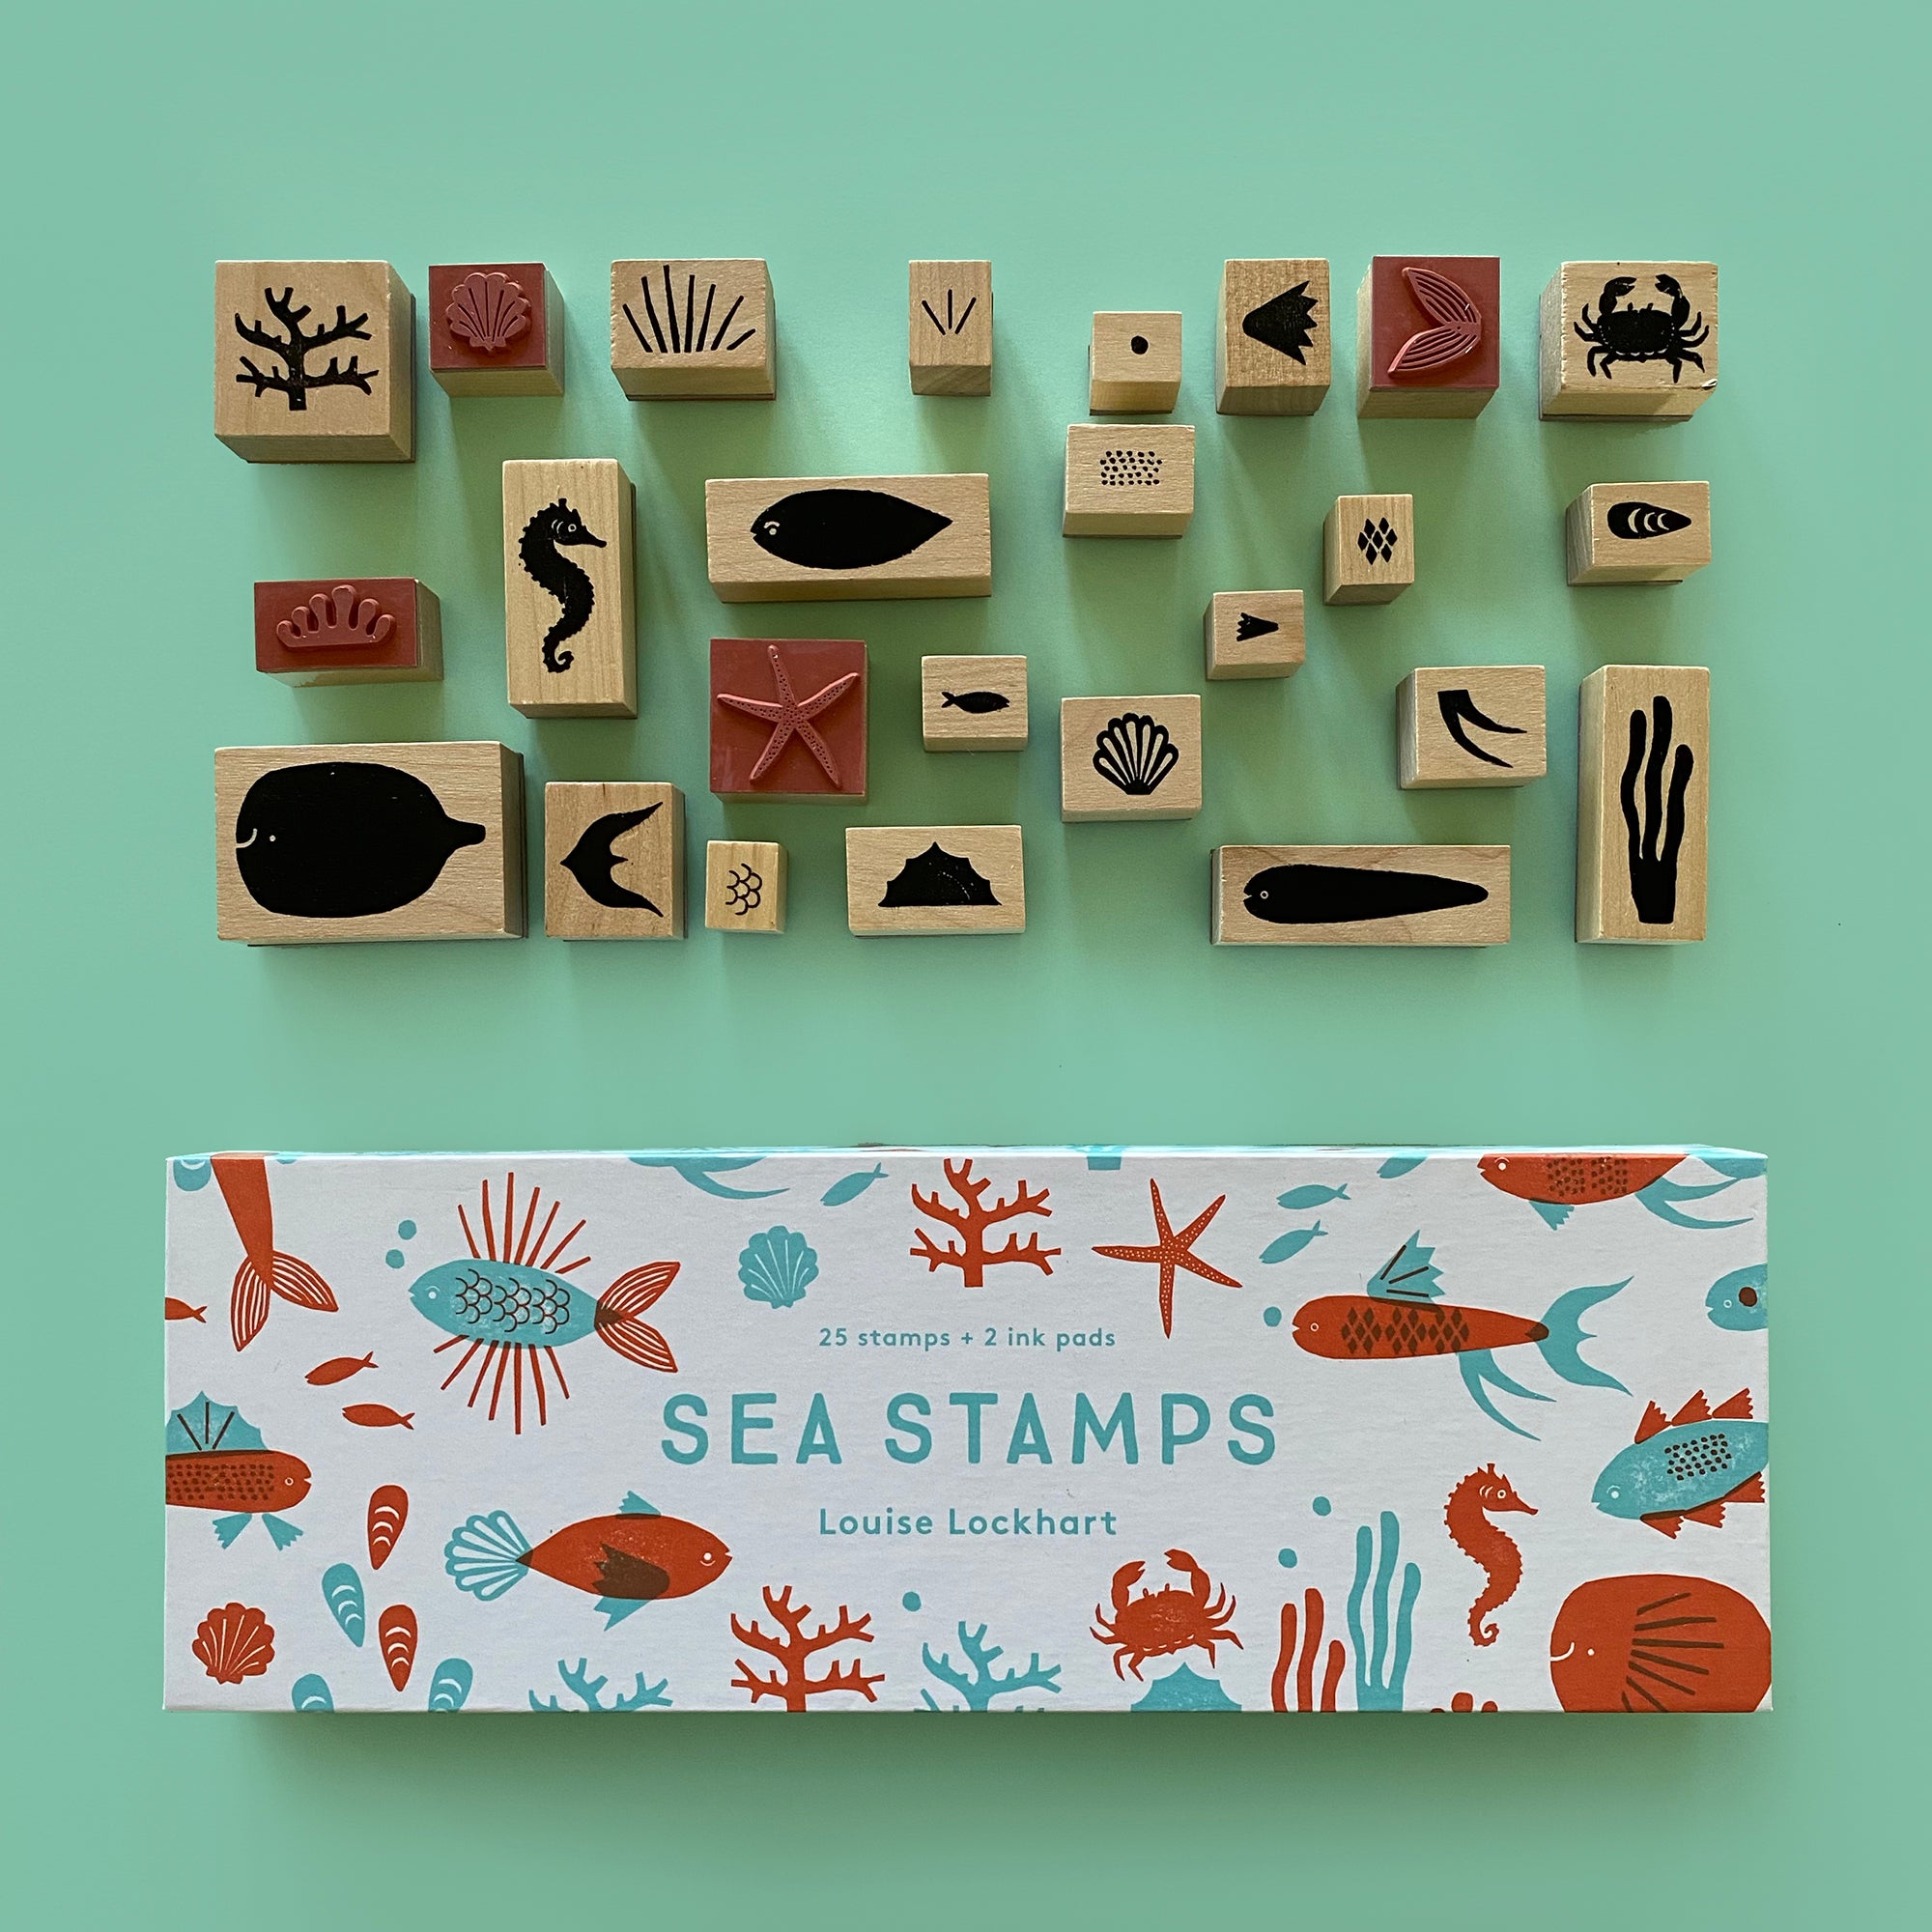 SEA STAMPS